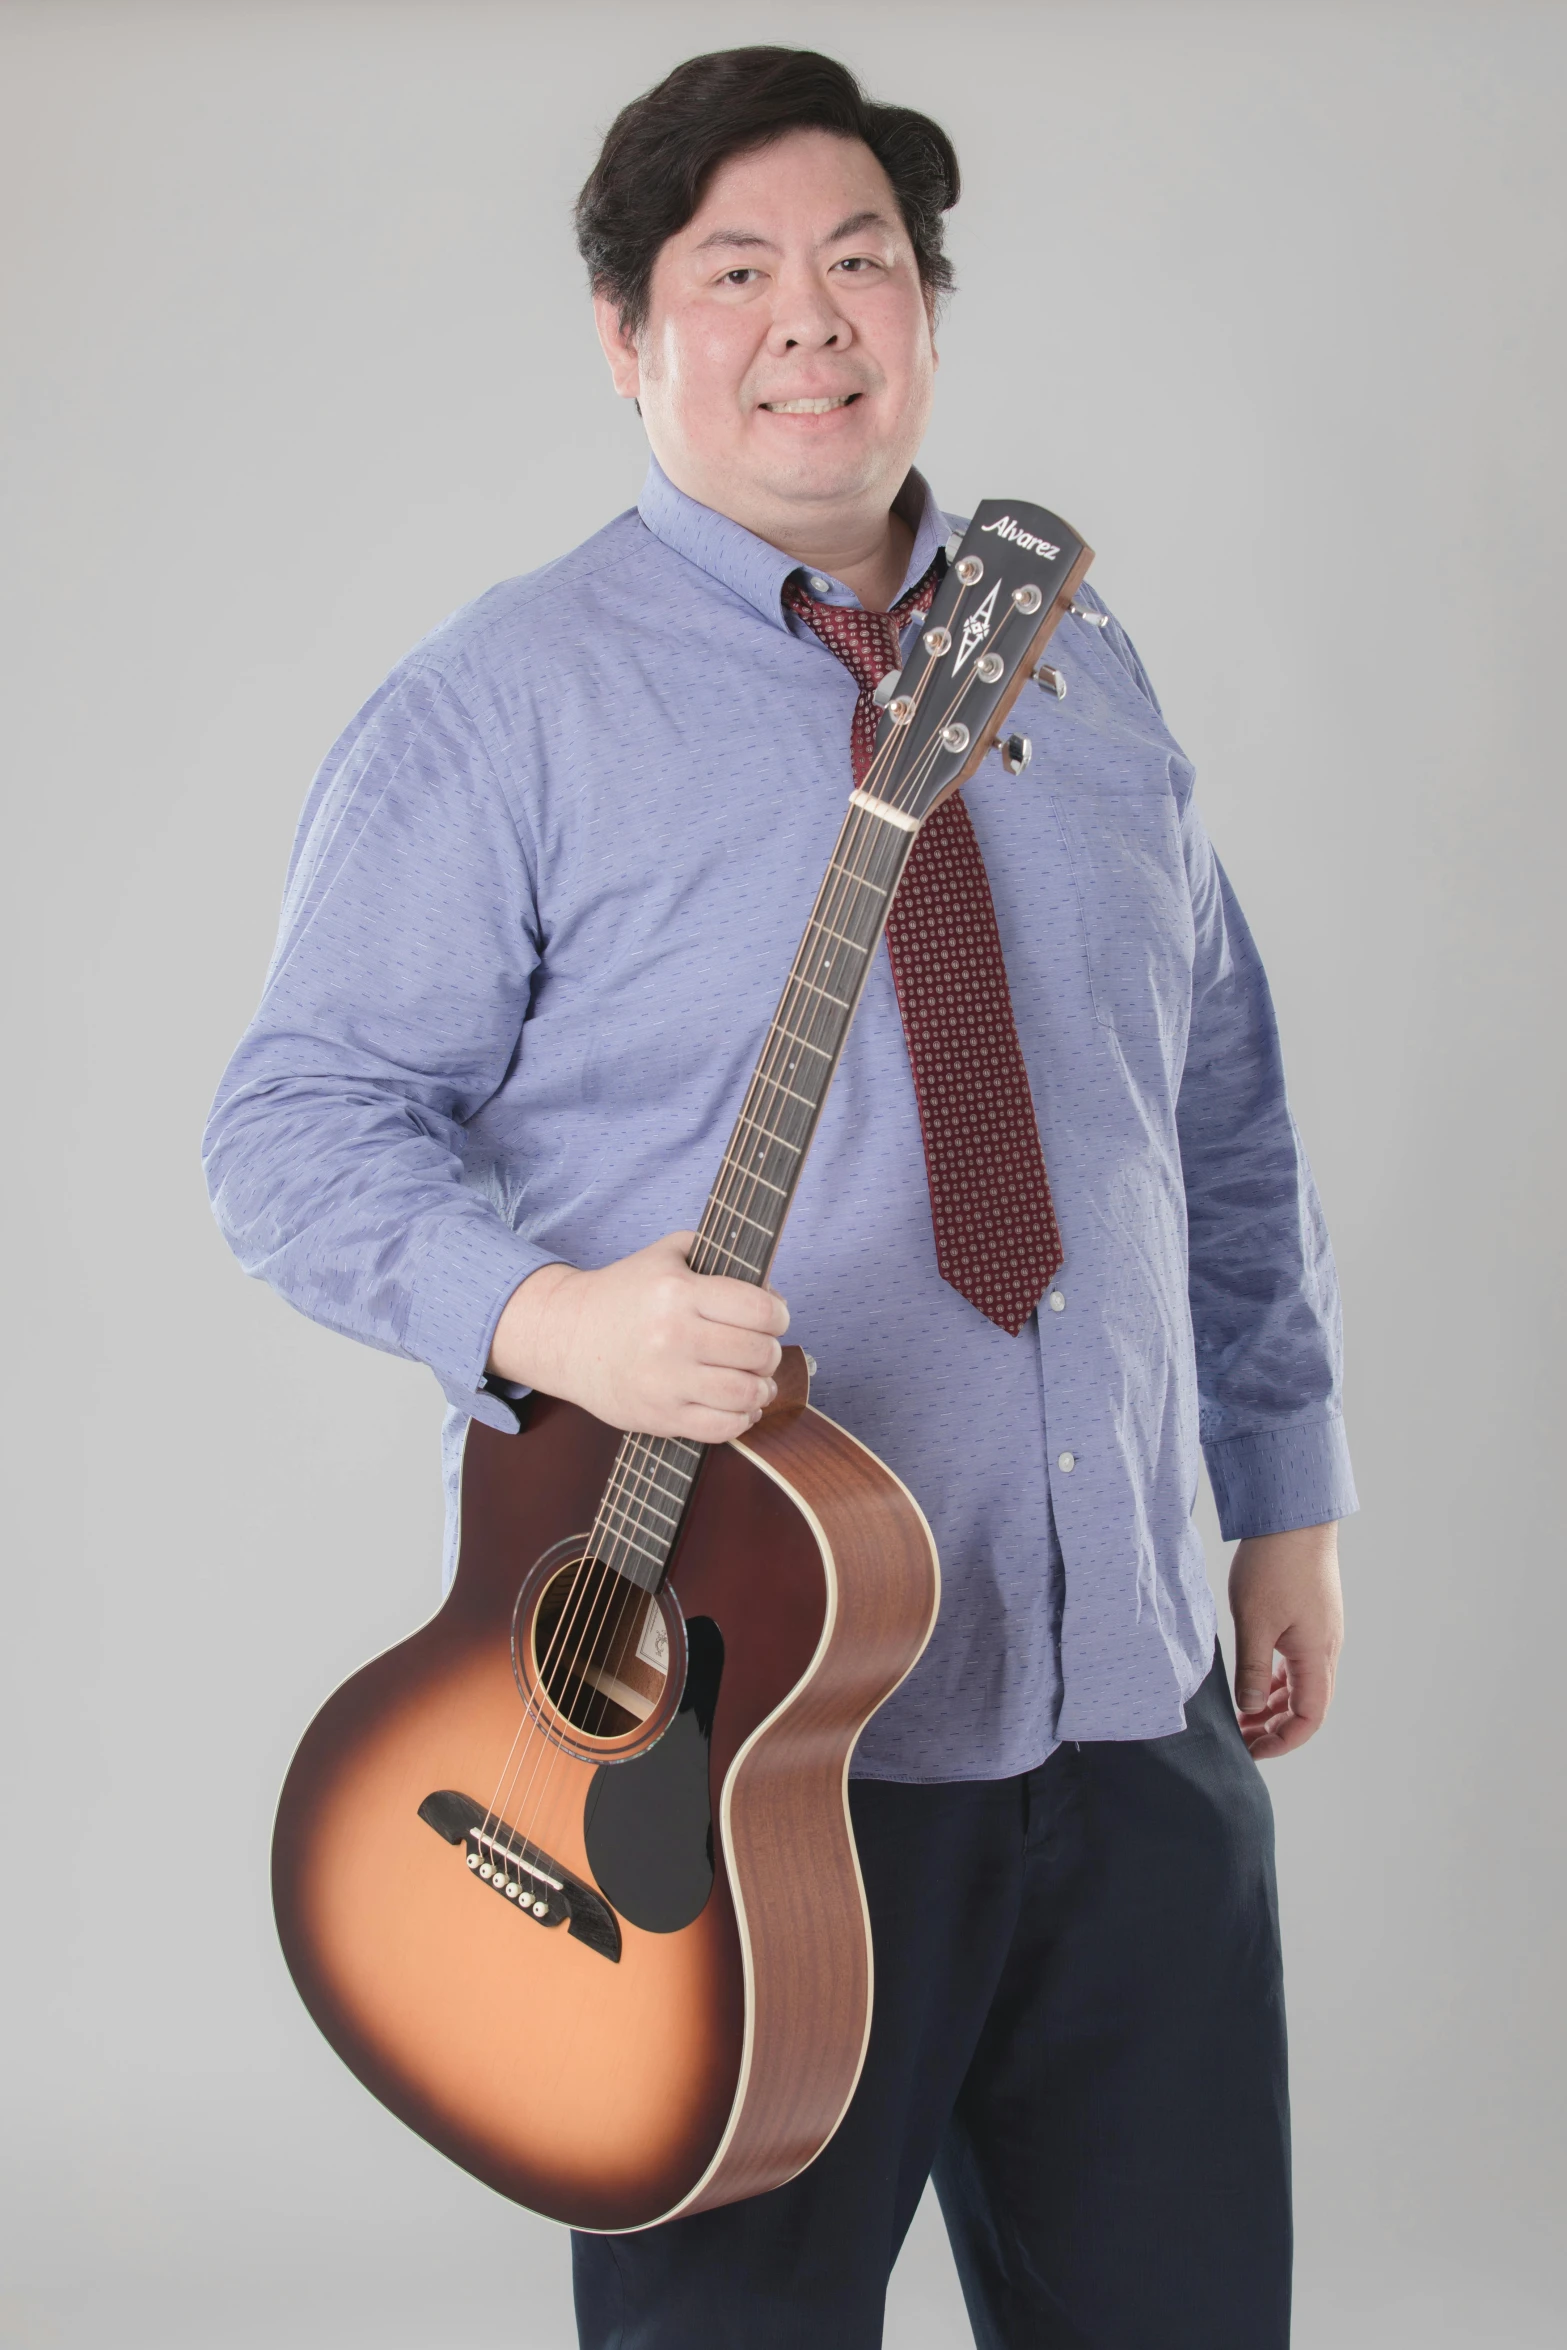 a person is holding a guitar and wearing a blue shirt